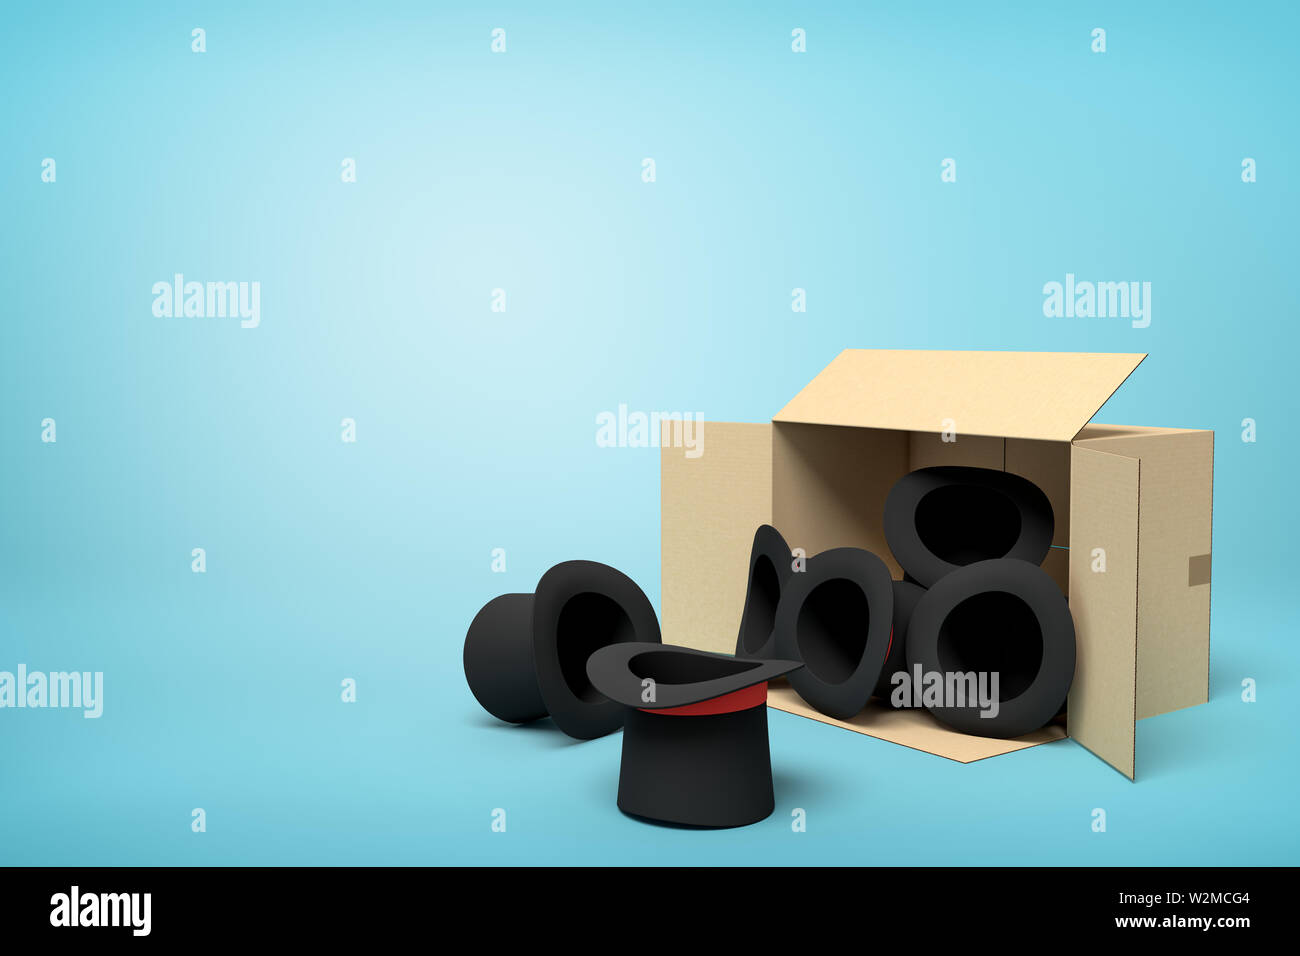 3d rendering of black top hats falling out of a carton box on blue background Stock Photo